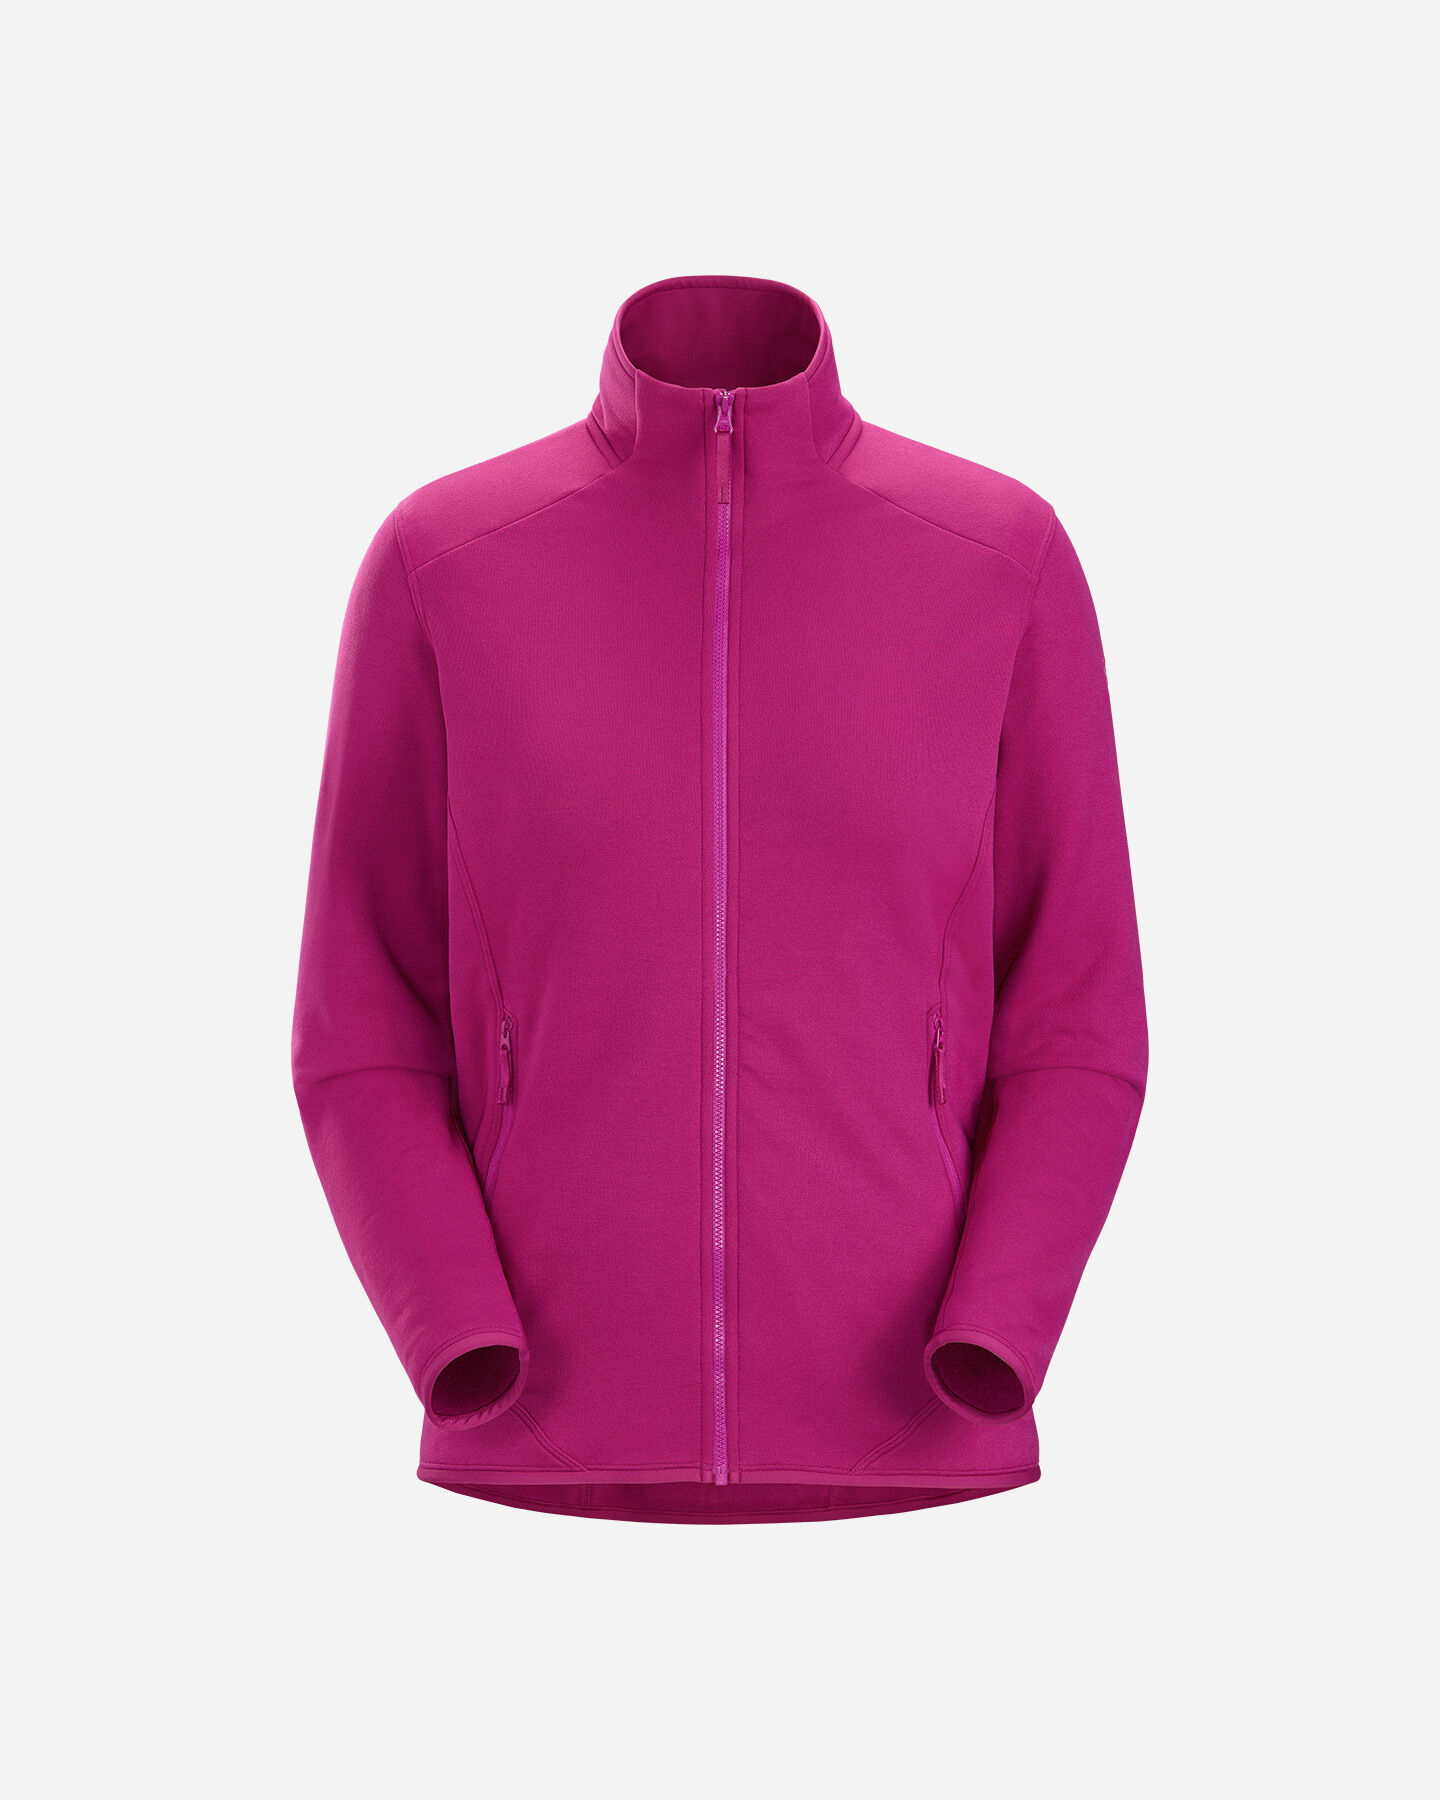  Pile ARC'TERYX KYANITE SYNTH W S4114898|1|S scatto 0